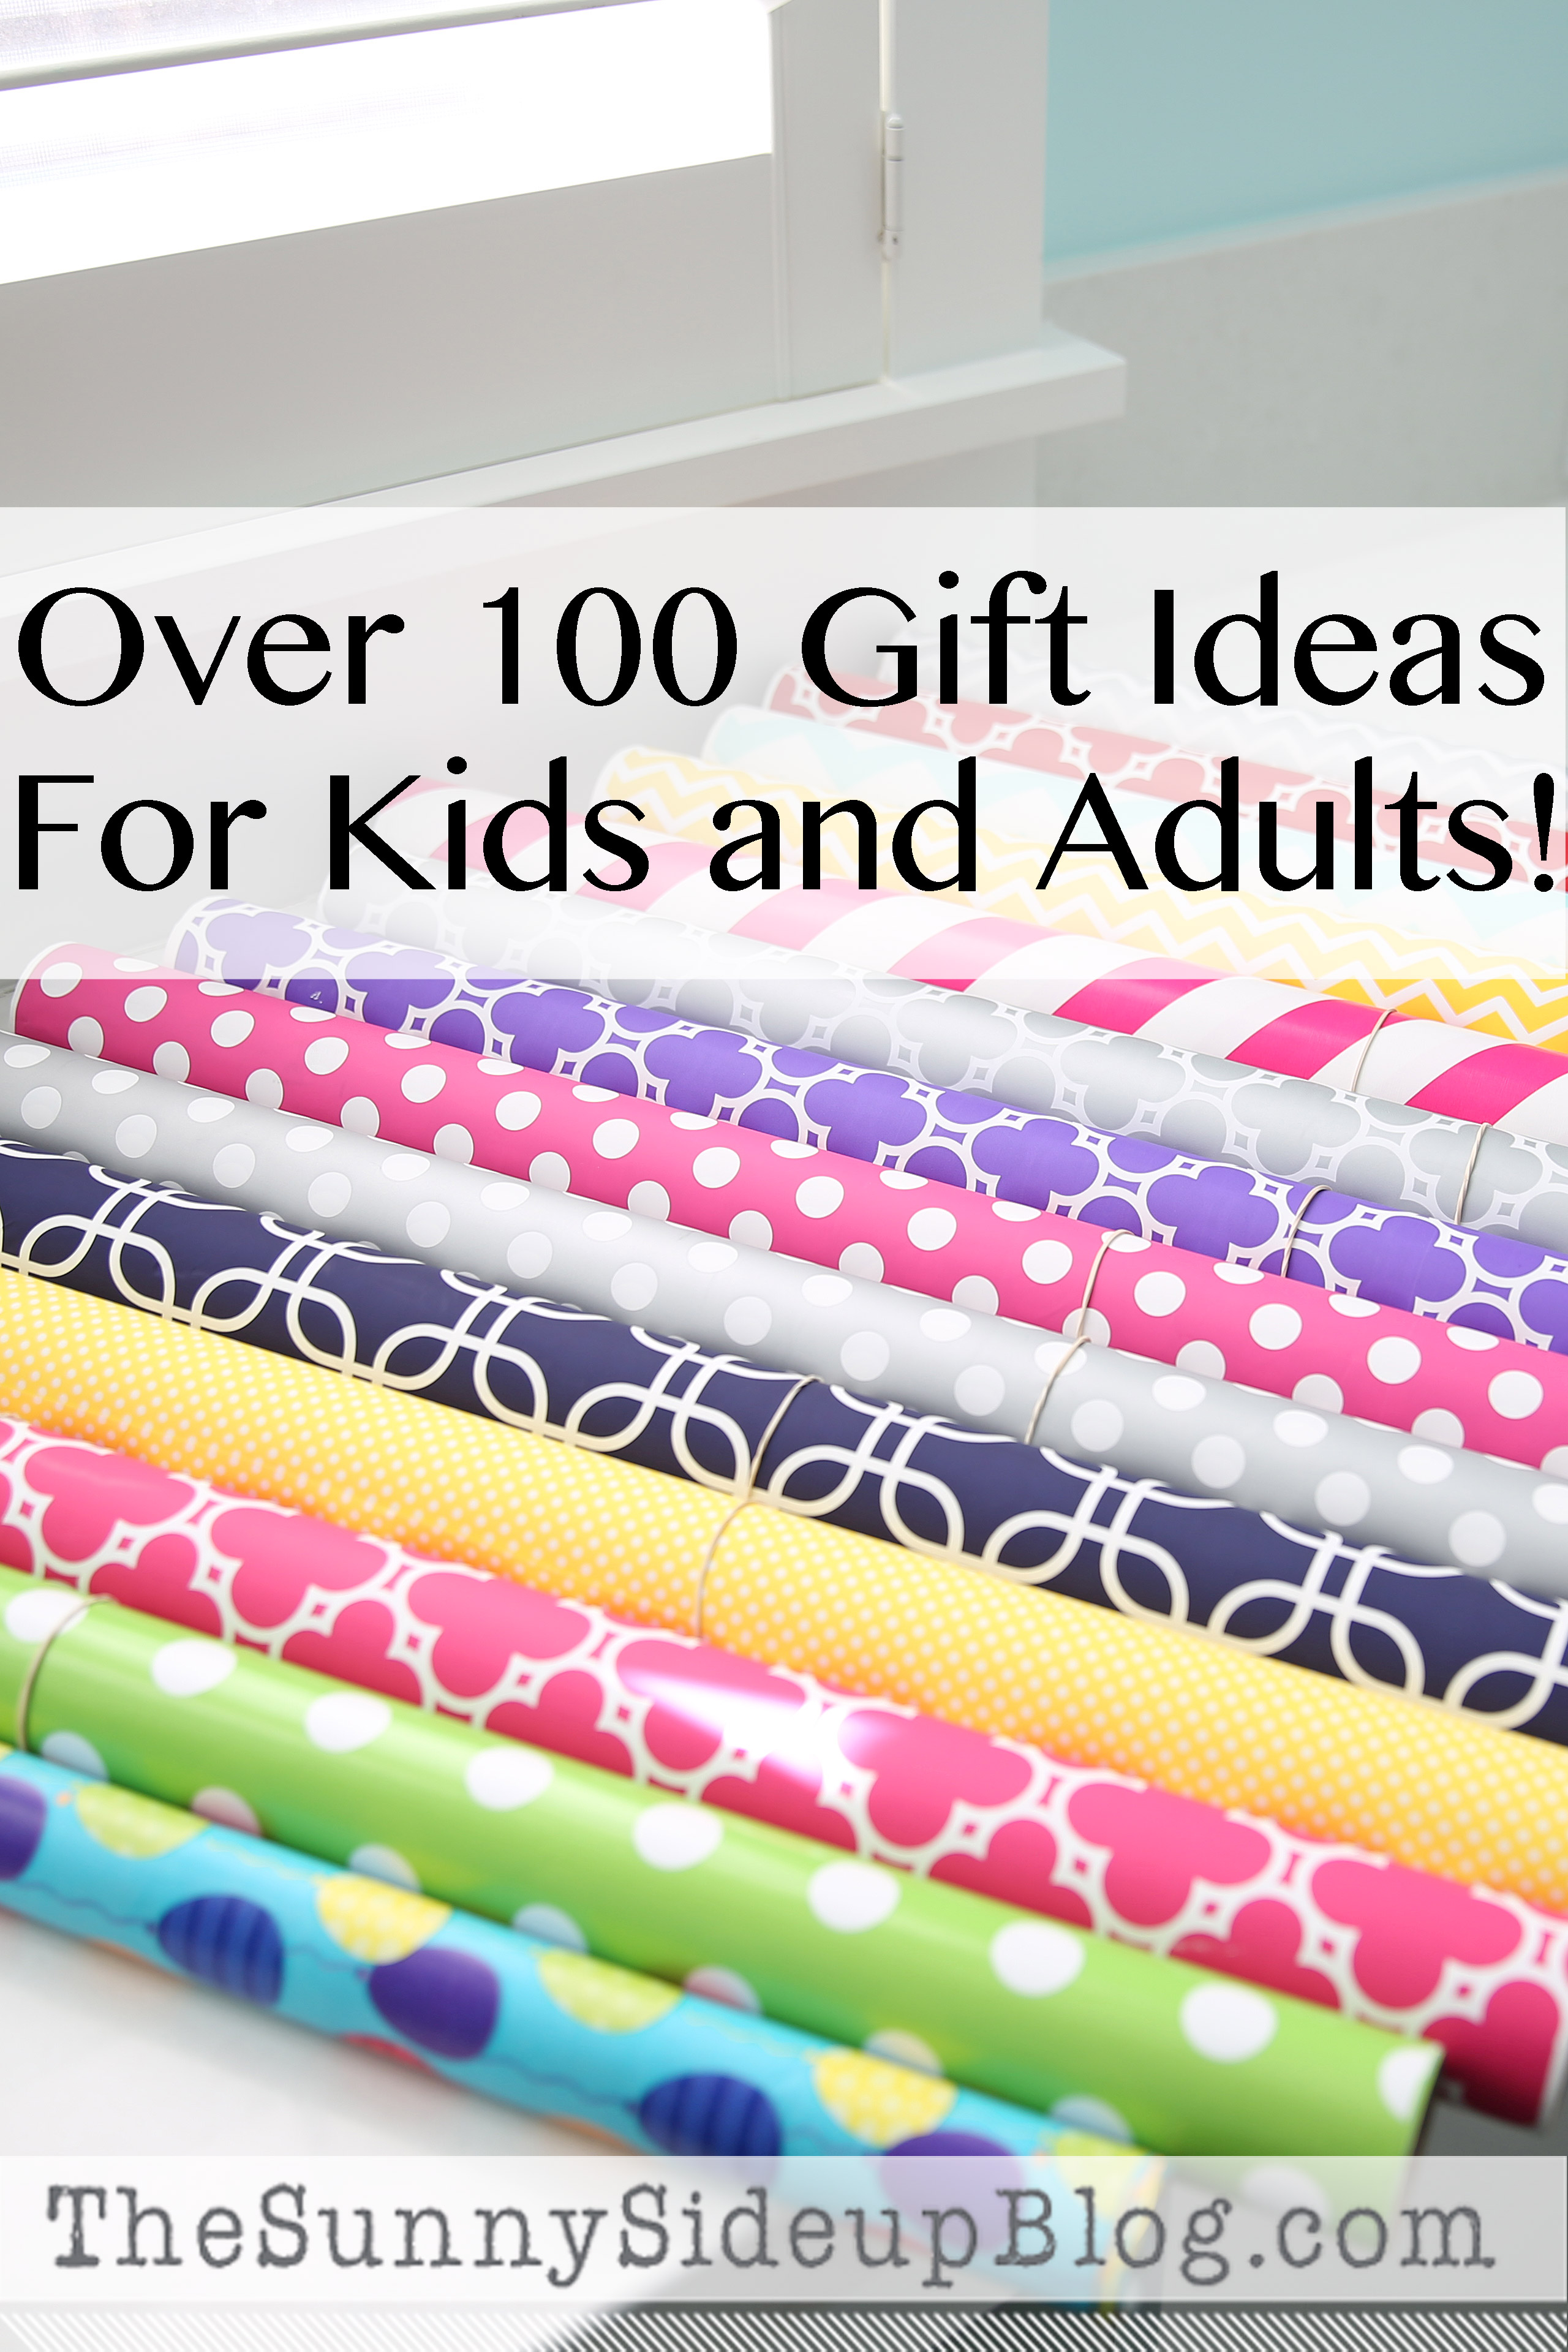 over-100-gift-ideas-for-kids-and-adults